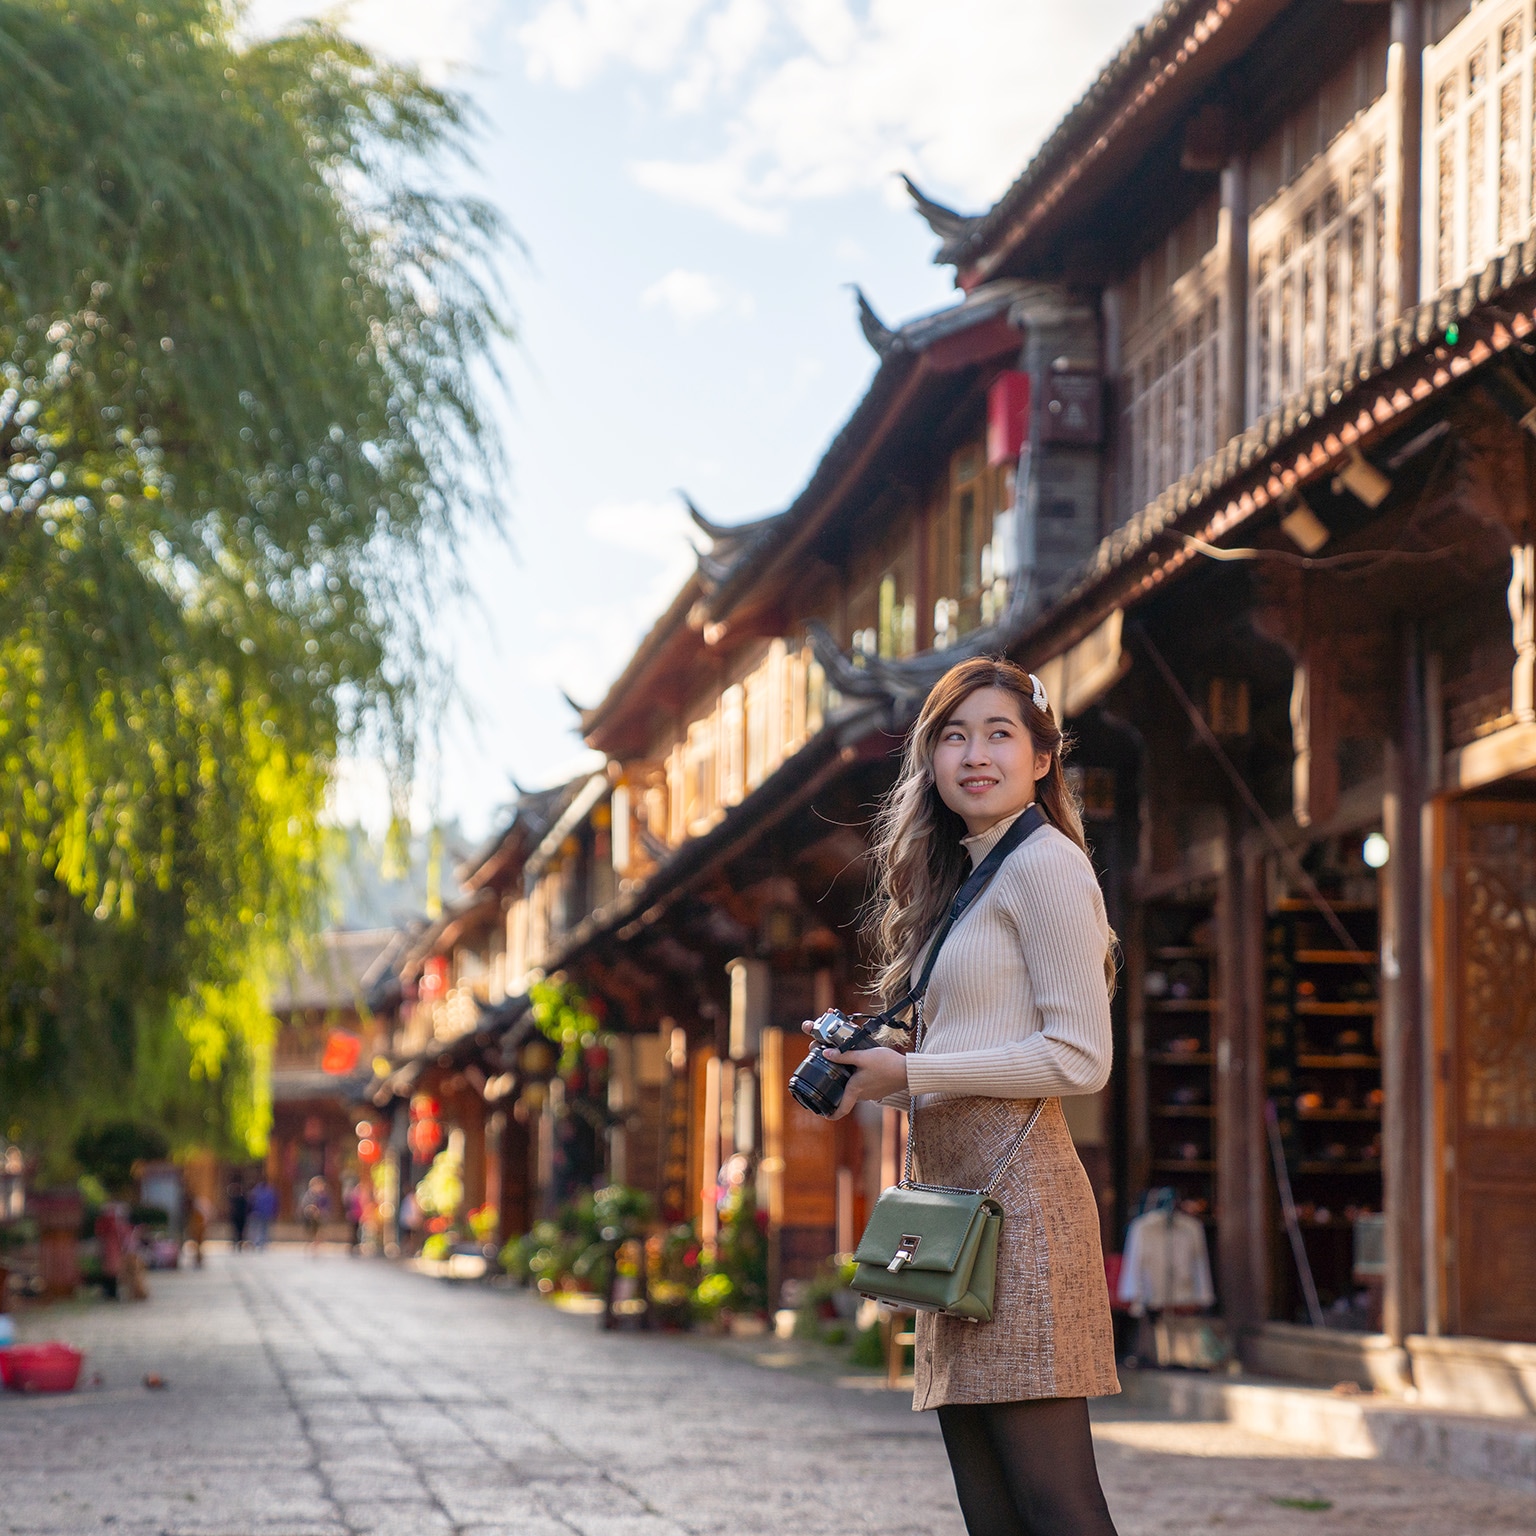 China tourism in 2022: Trends to watch